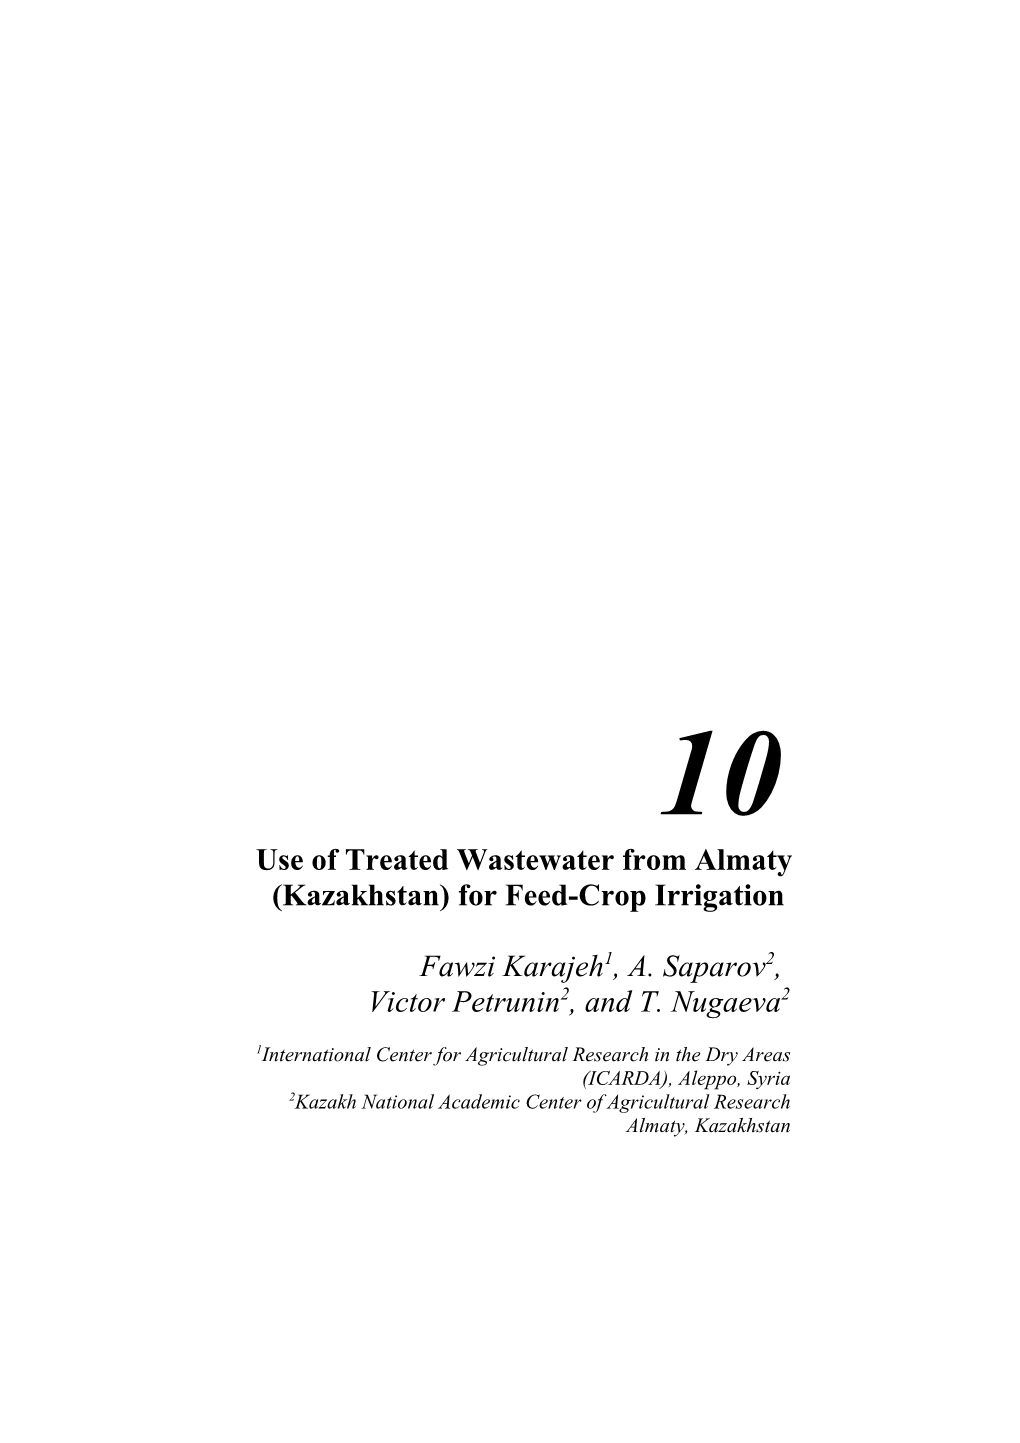 Use of Treated Wastewater from Almaty (Kazakhstan) for Feed-Crop Irrigation